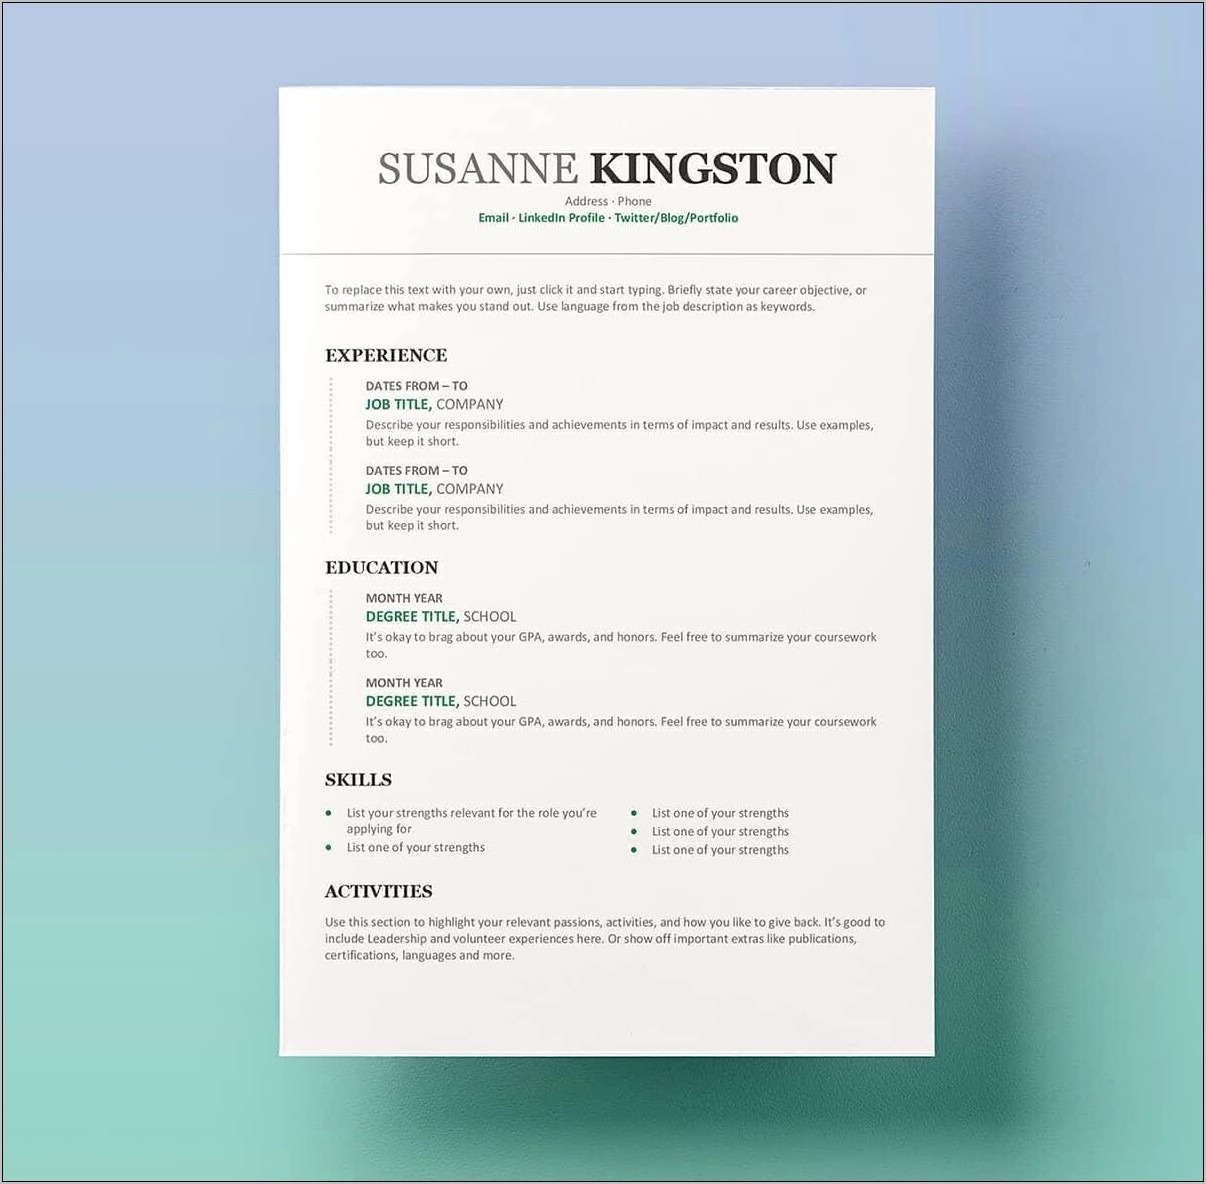 nname-xxc-microsoft-word-resume-template-resume-example-gallery